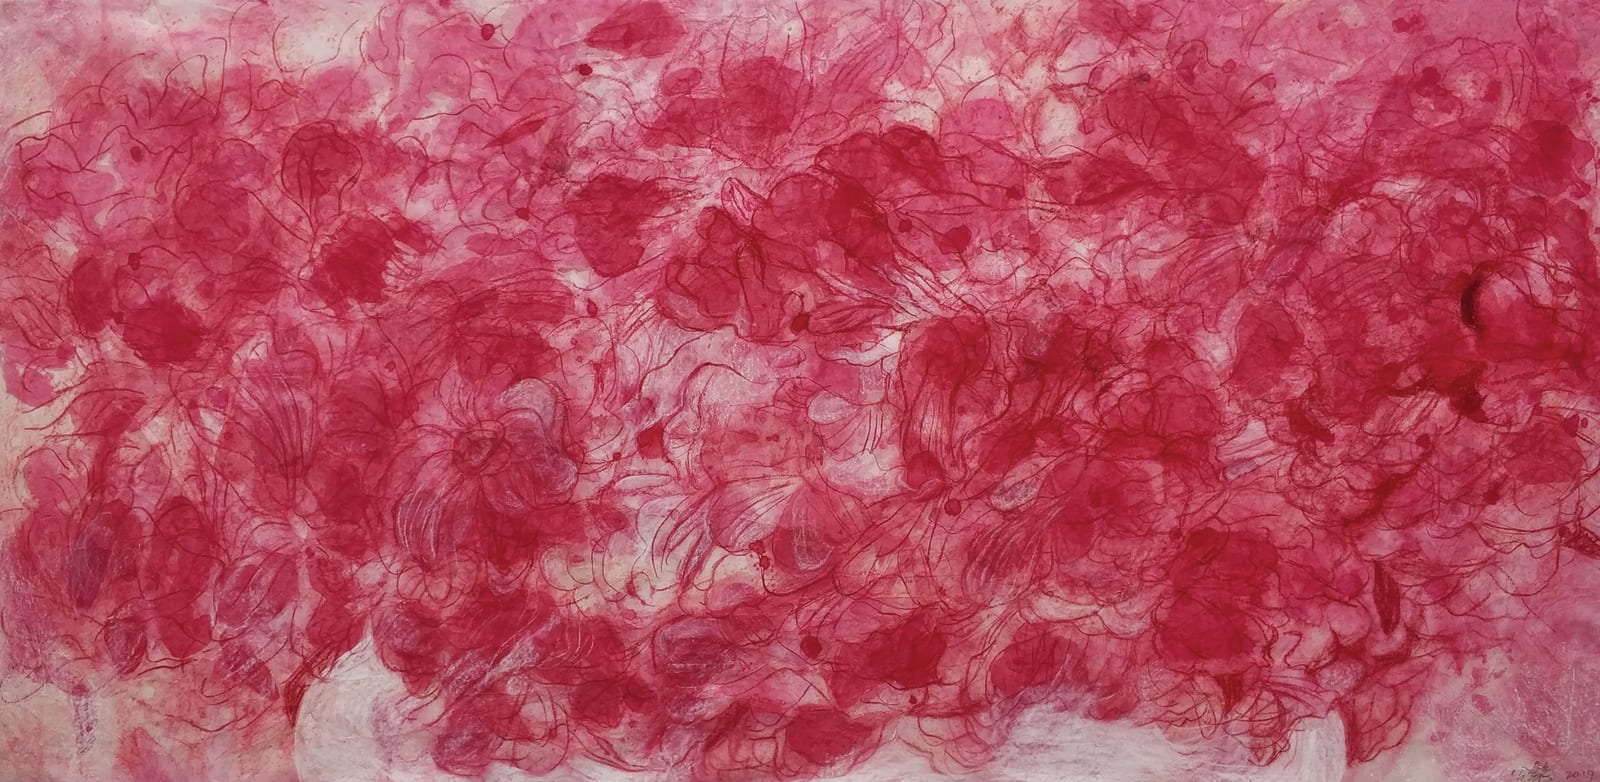 Wang Gongyi 王公懿, The White Flowers Under the Red Sky 紅色的天空，白色的花, 2019